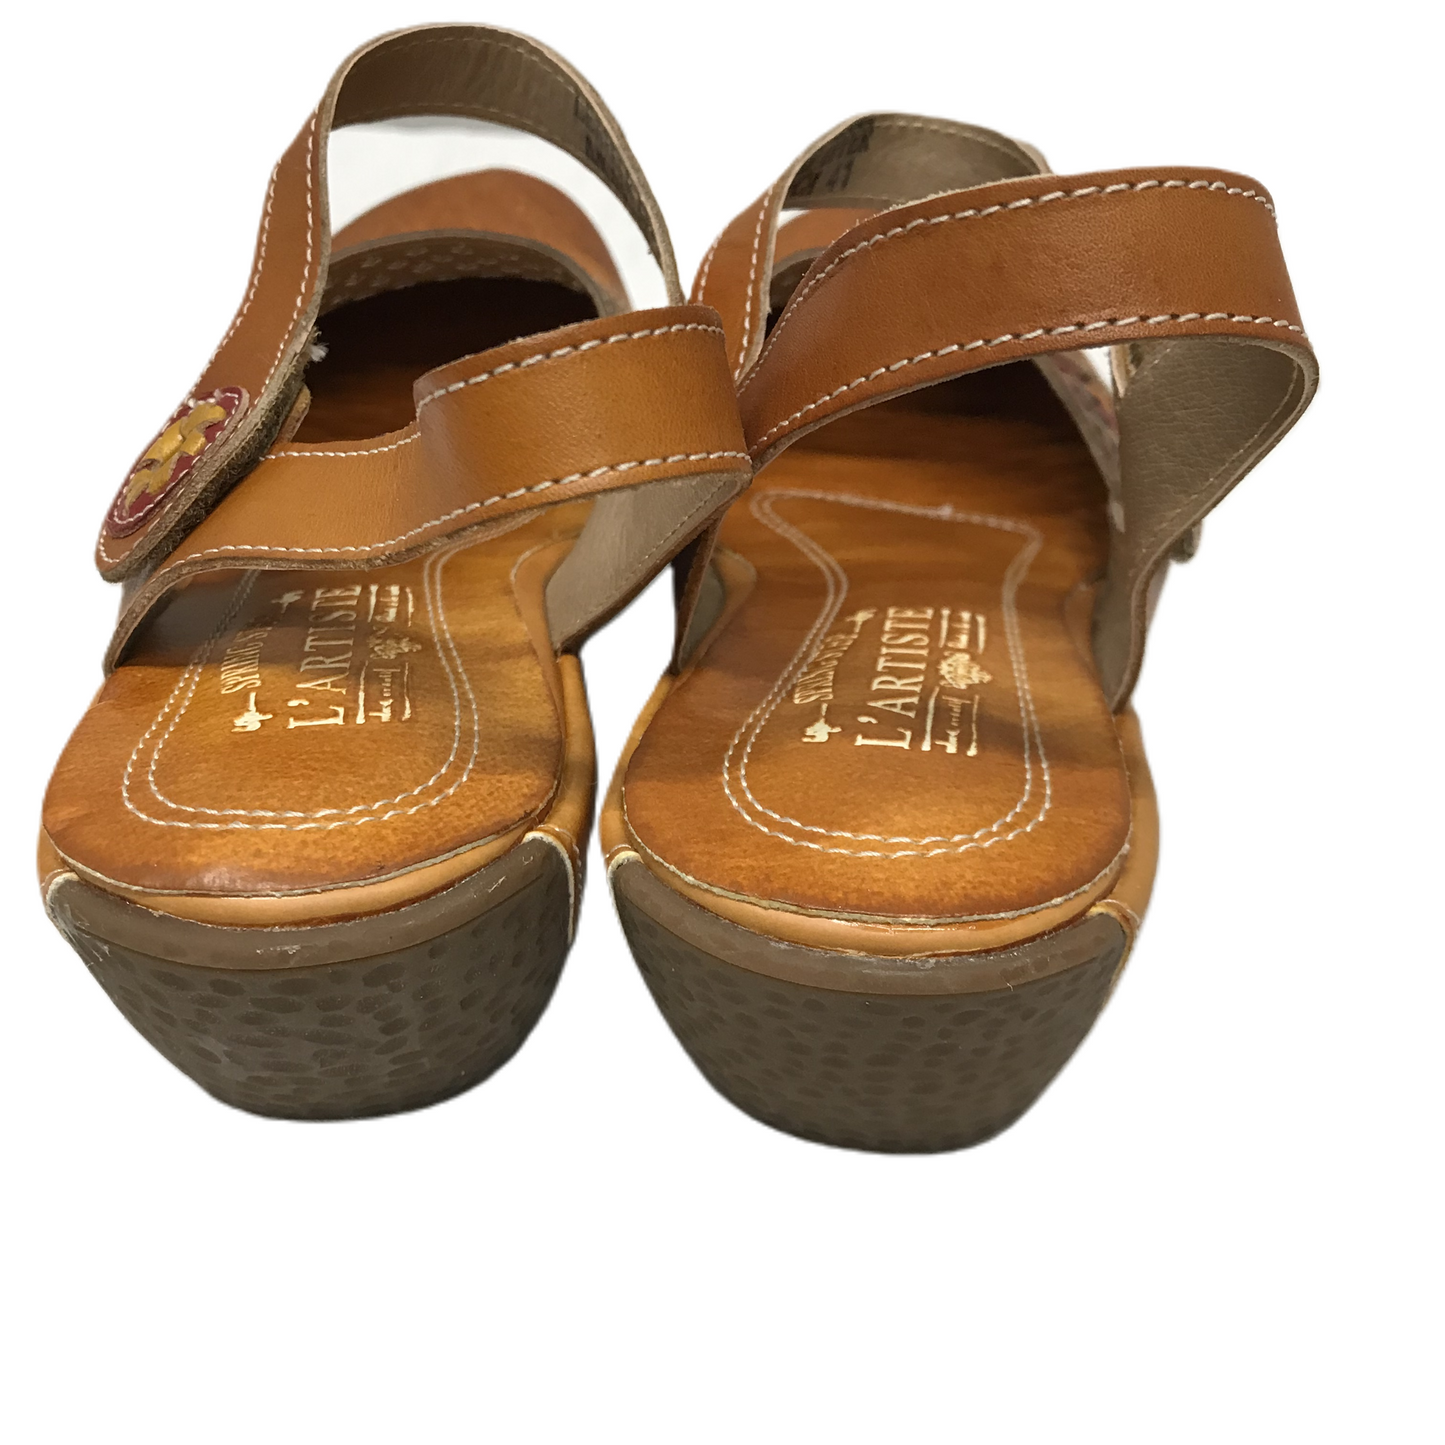 Tan Shoes Flats By Spring Step, Size: 9